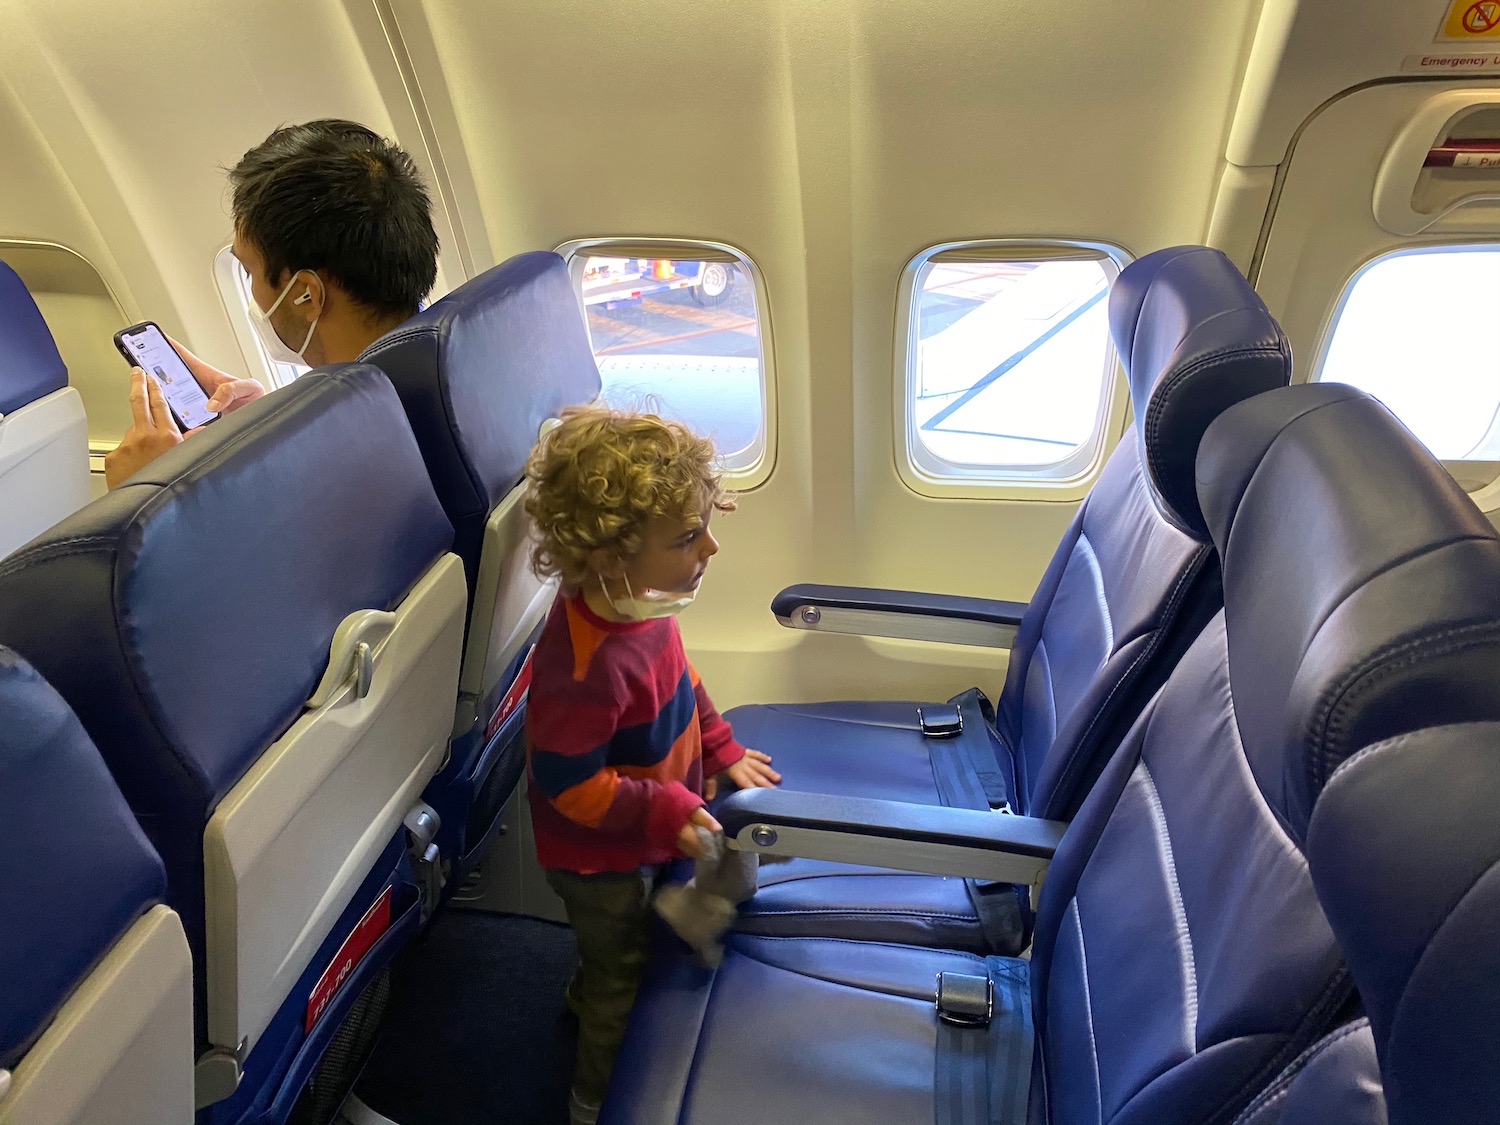 southwest airlines seating map